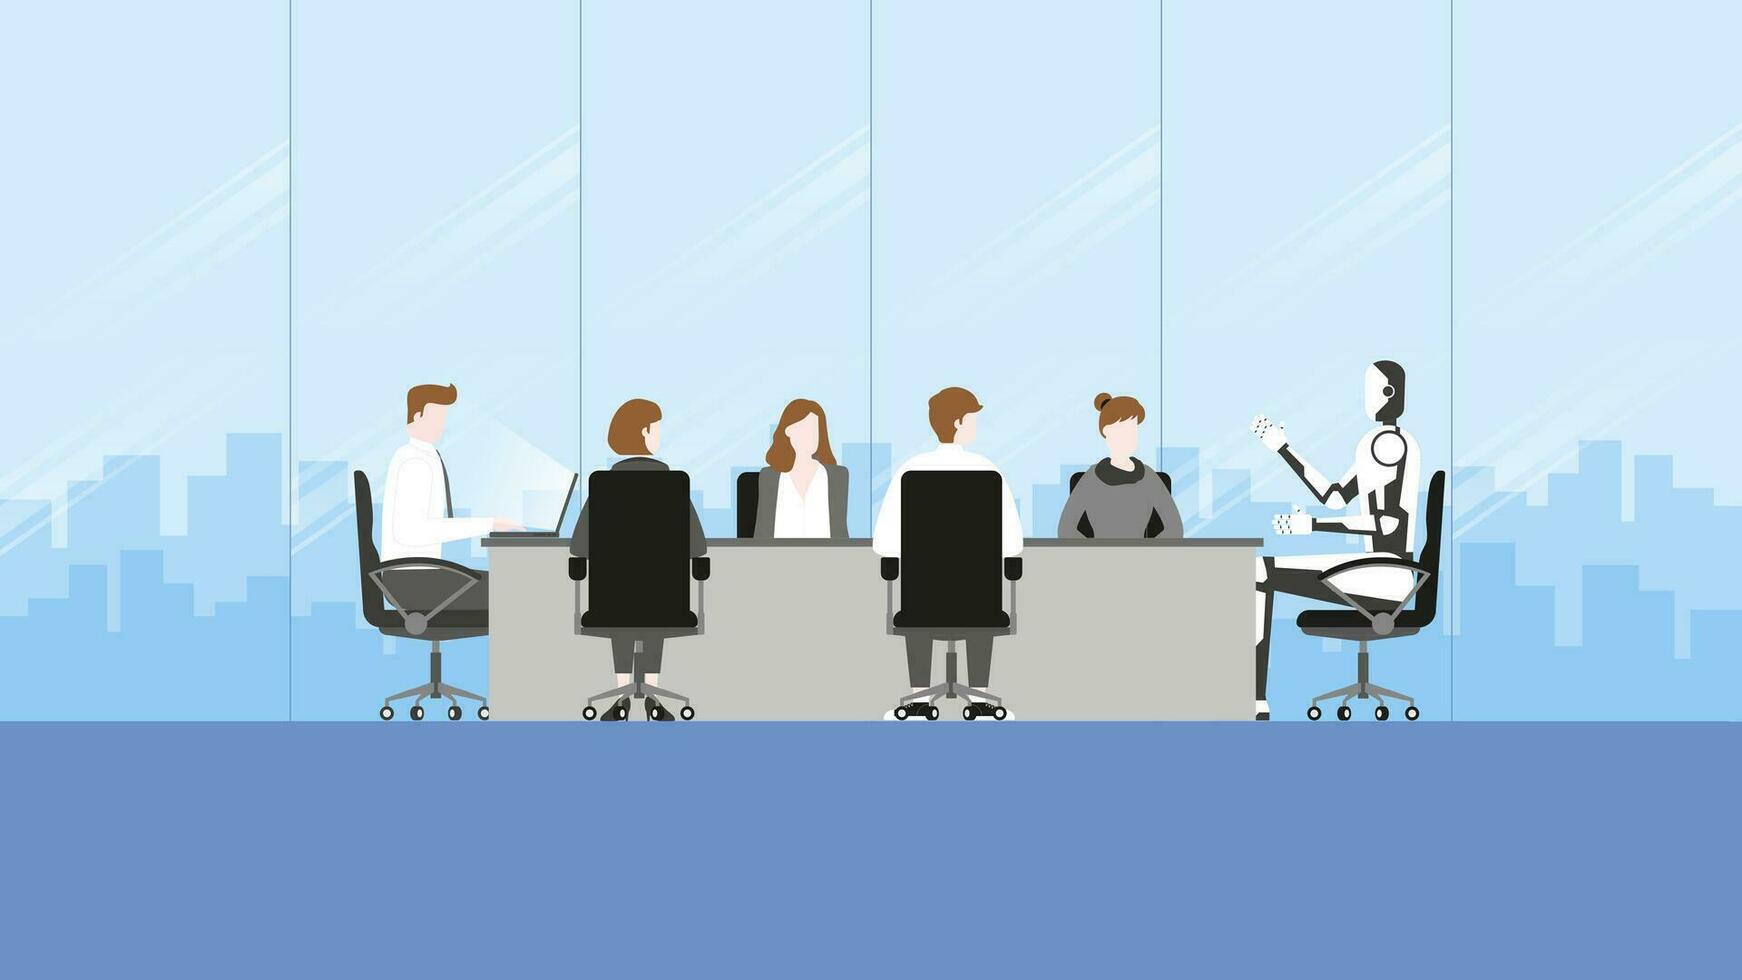 robot working together as teamwork during business meeting in office conference room vector